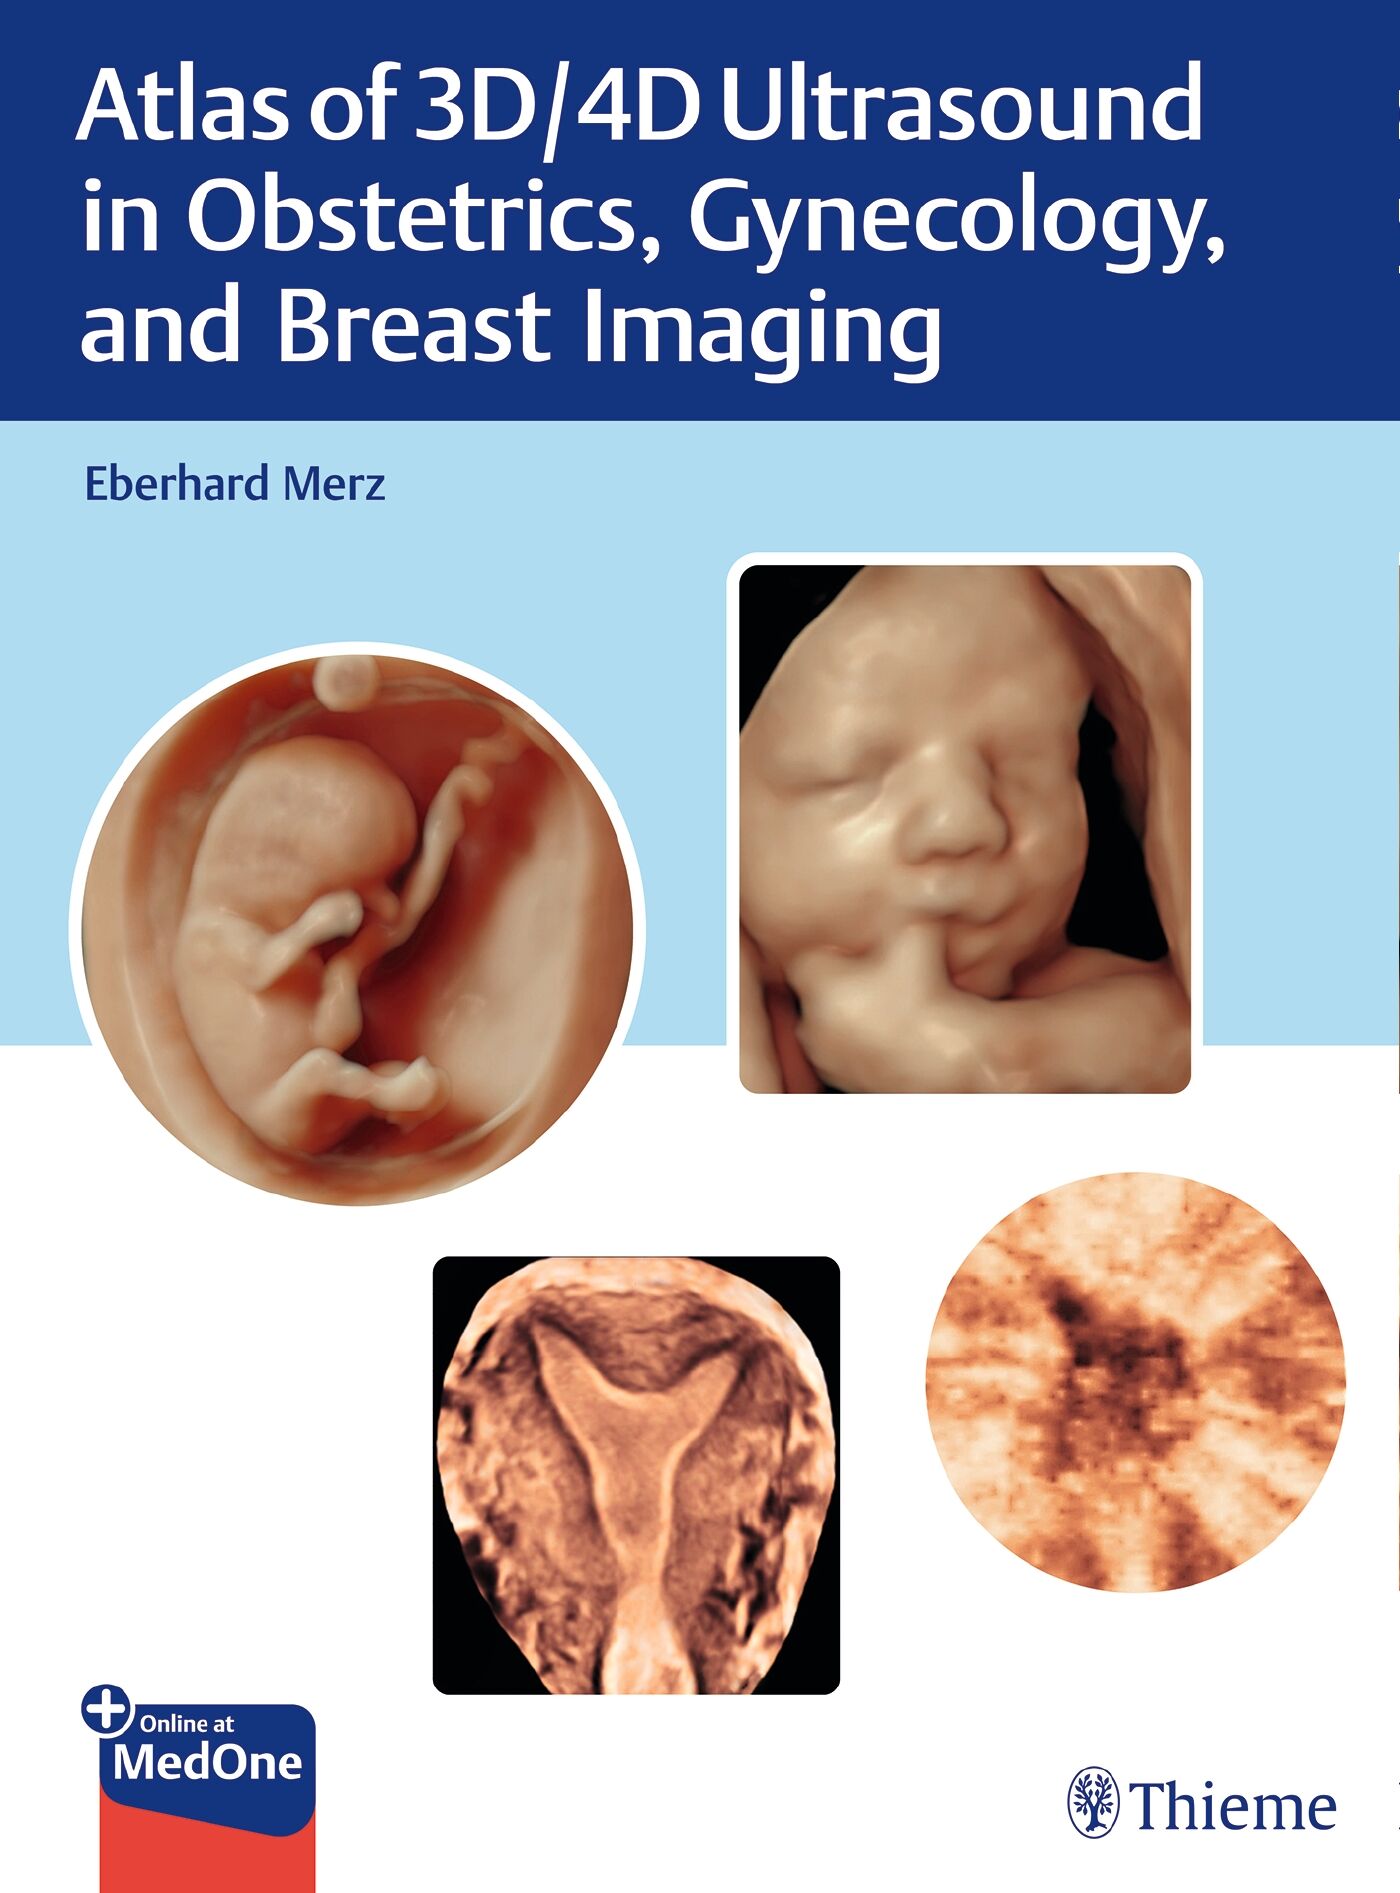 Atlas of 3D/4D Ultrasound in Obstetrics, Gynecology, and Breast Imaging, 9783131764218